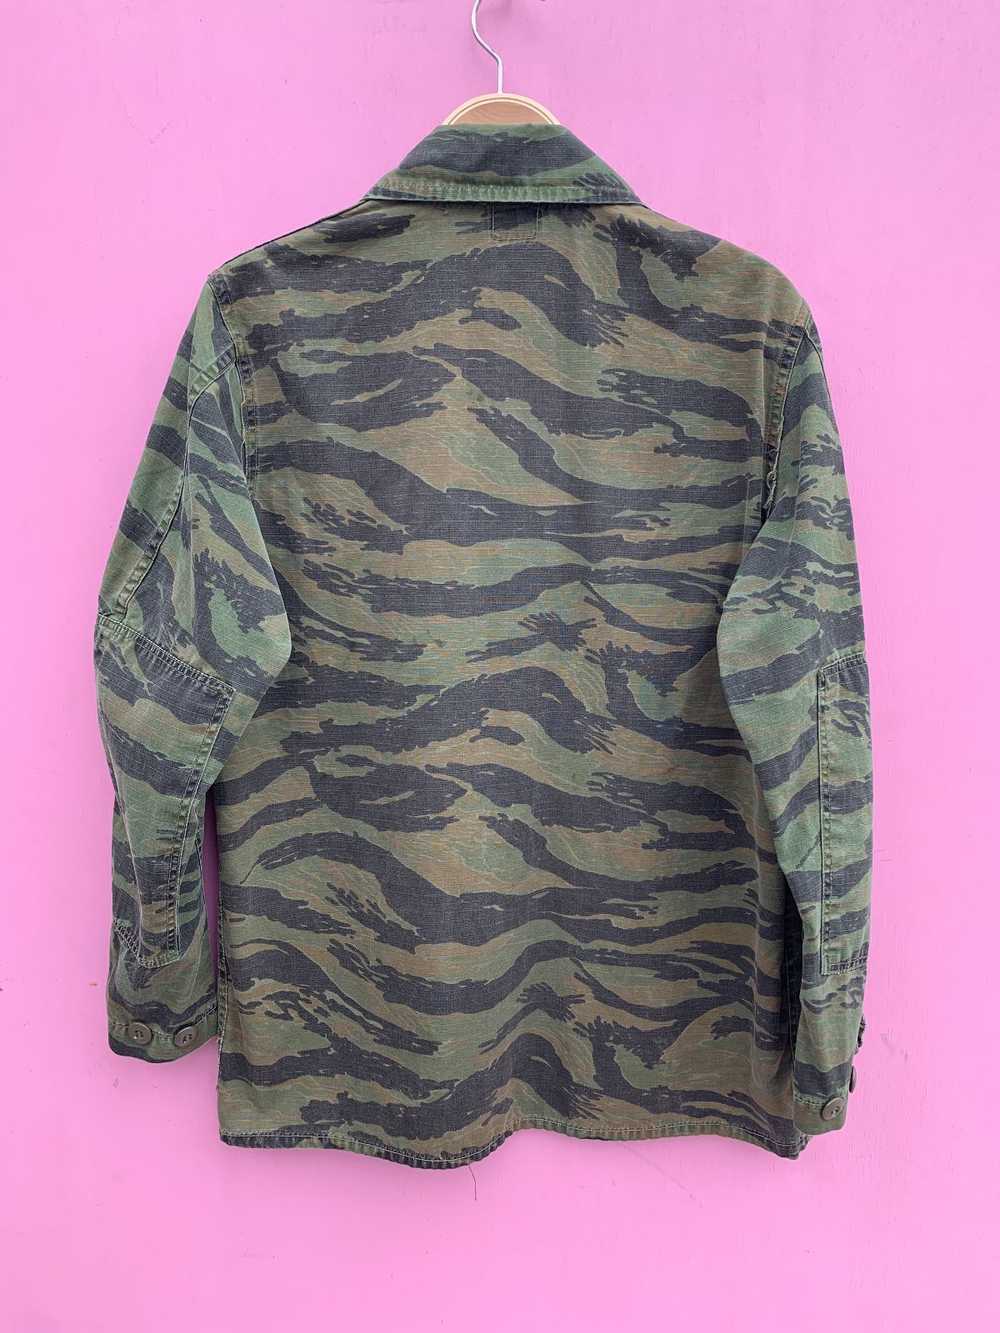 RAD TIGER CAMO MILITARY BUTTON UP JACKET - image 4